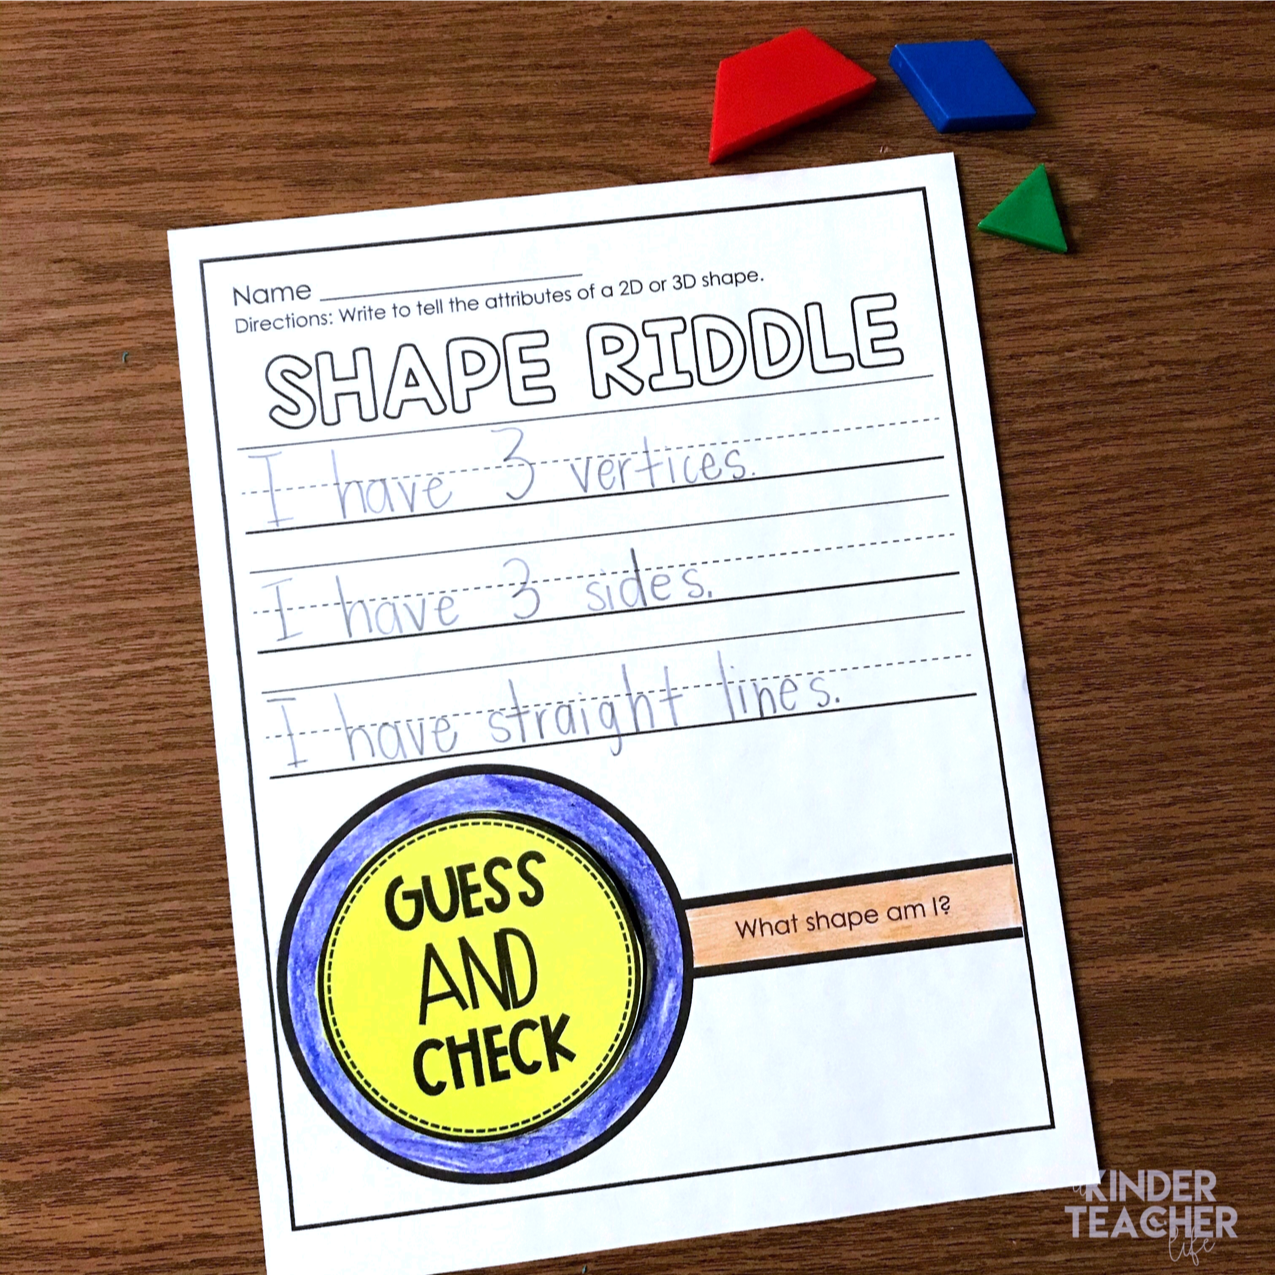 Create shape riddles using the shape attributes